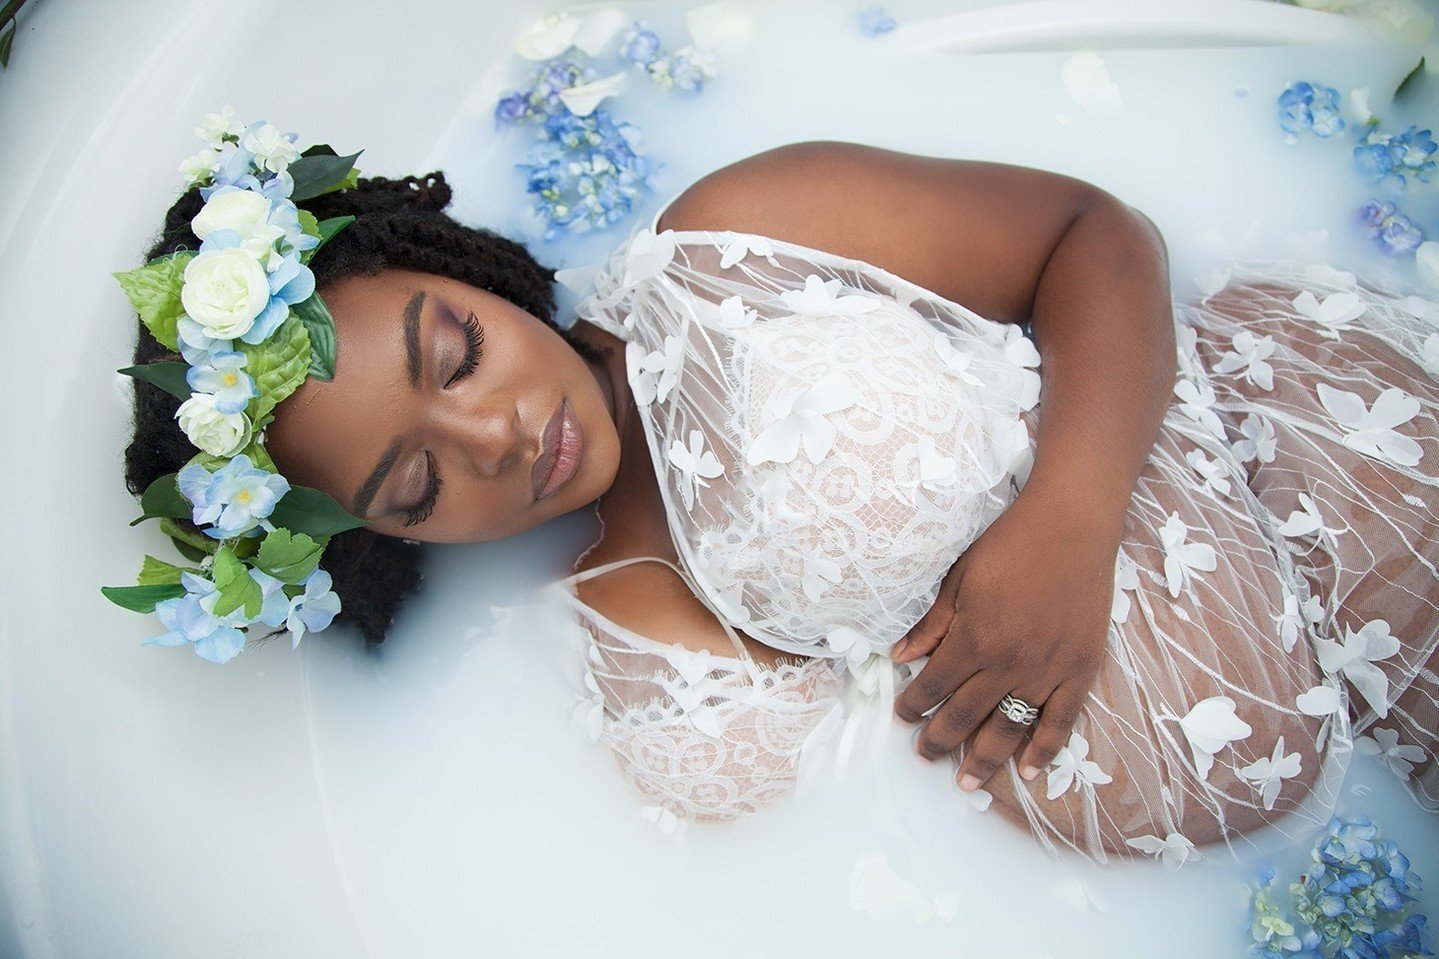 Milk bath are such a favorite!⁠
This is an in home photoshoot on location must have a bathtub 🩵⁠
⁠
⁠
Documenting this time is so special... ⁠
⁠
Book your session online www.priscillagreenphotography.com⁠
⁠
Now reserving Maternity photo session dates